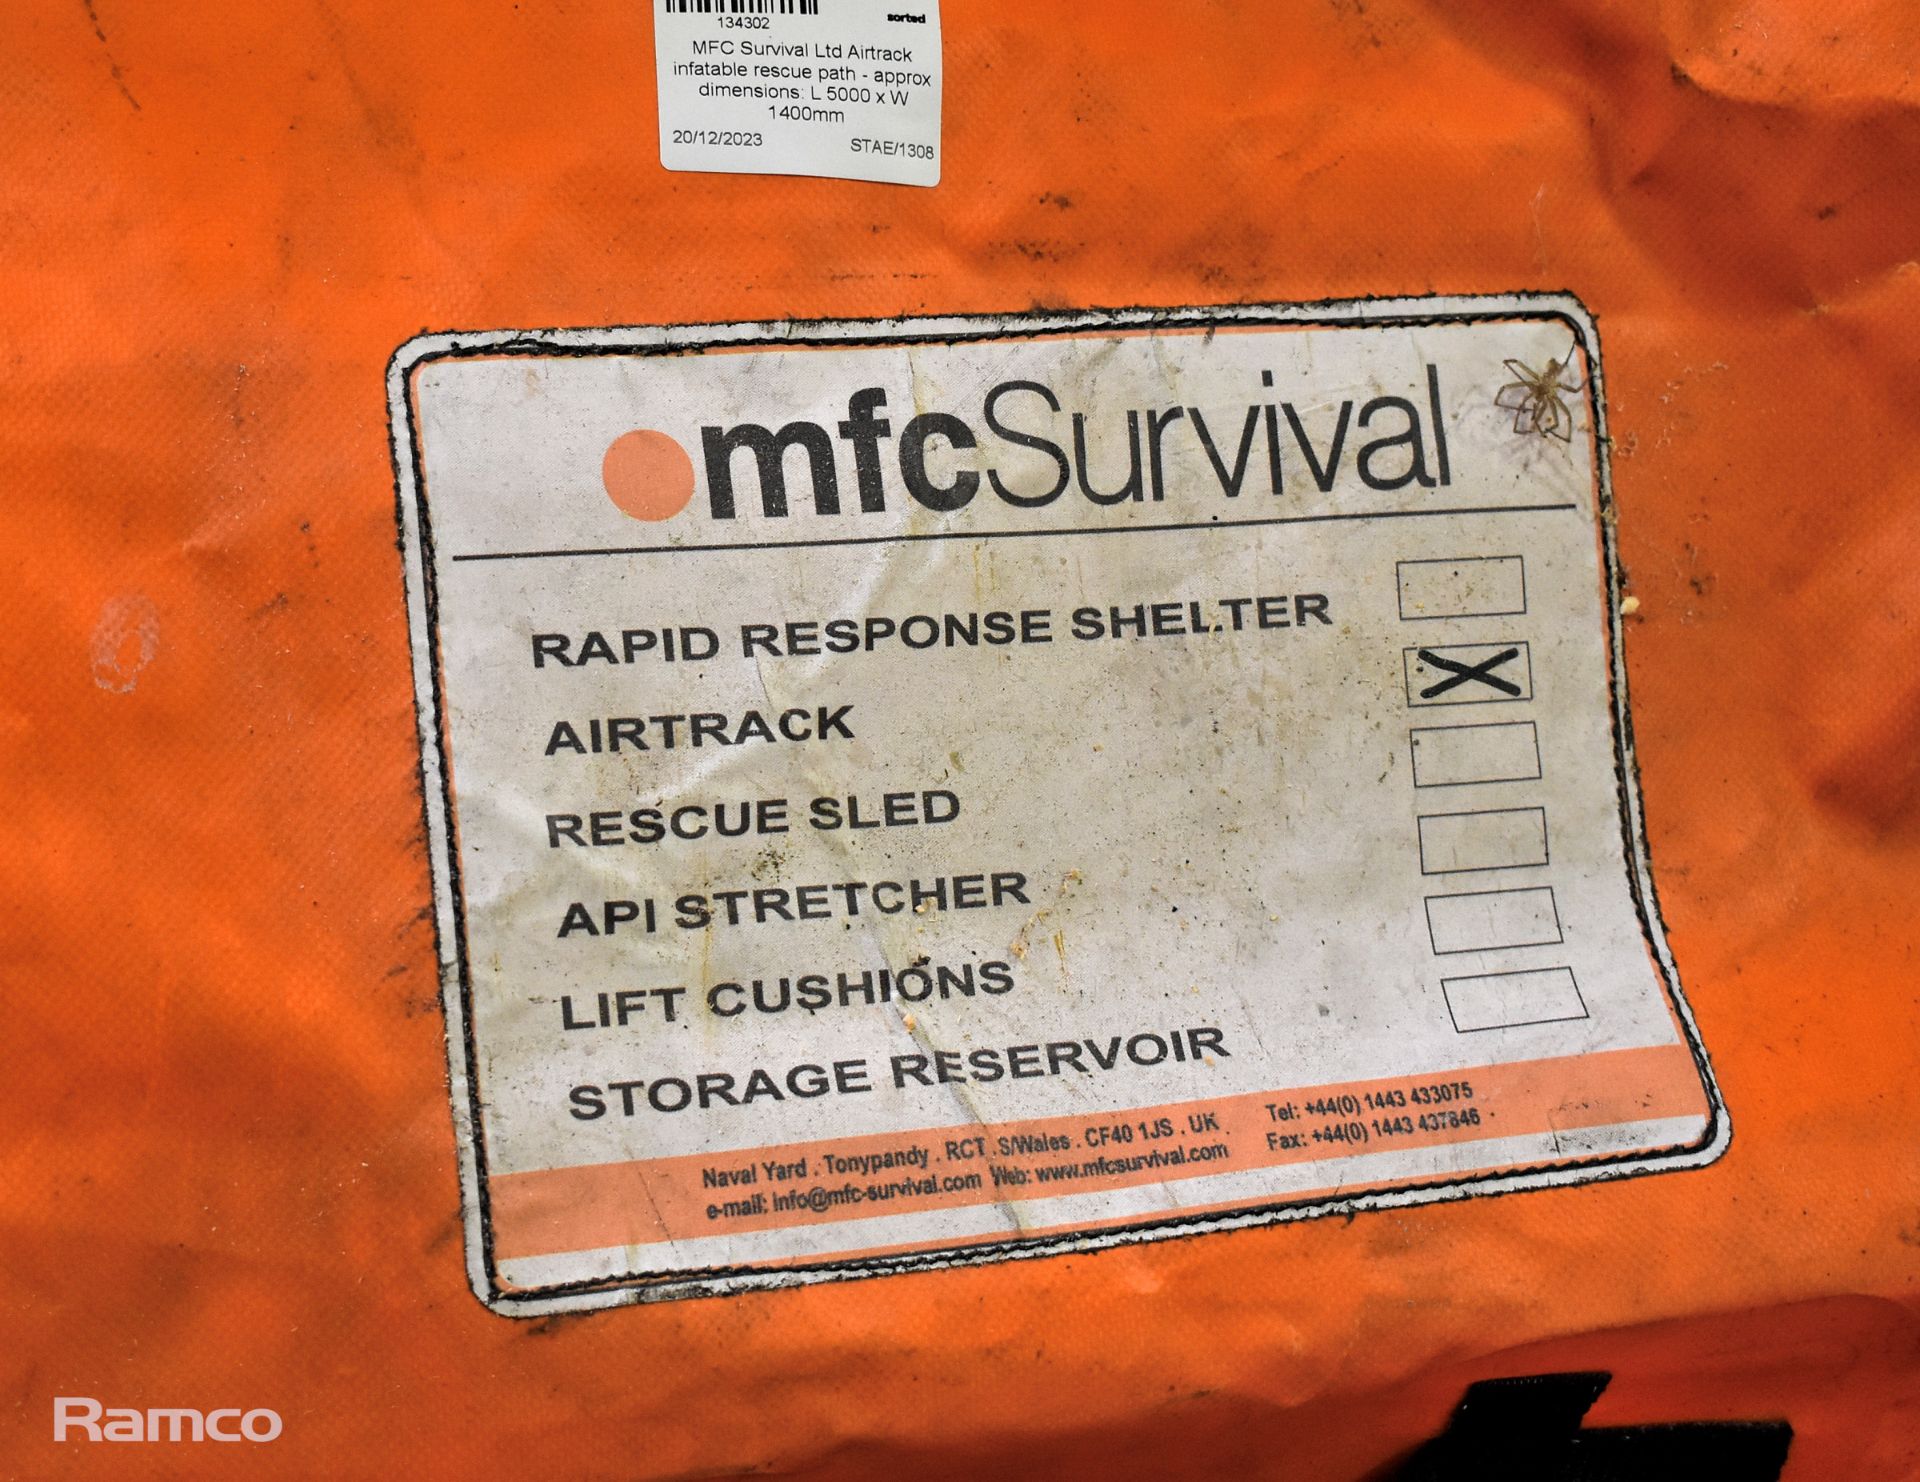 MFC Survival Ltd Airtrack inflatable rescue path - approx dimensions: L 5000 x W 1400mm - Image 3 of 3